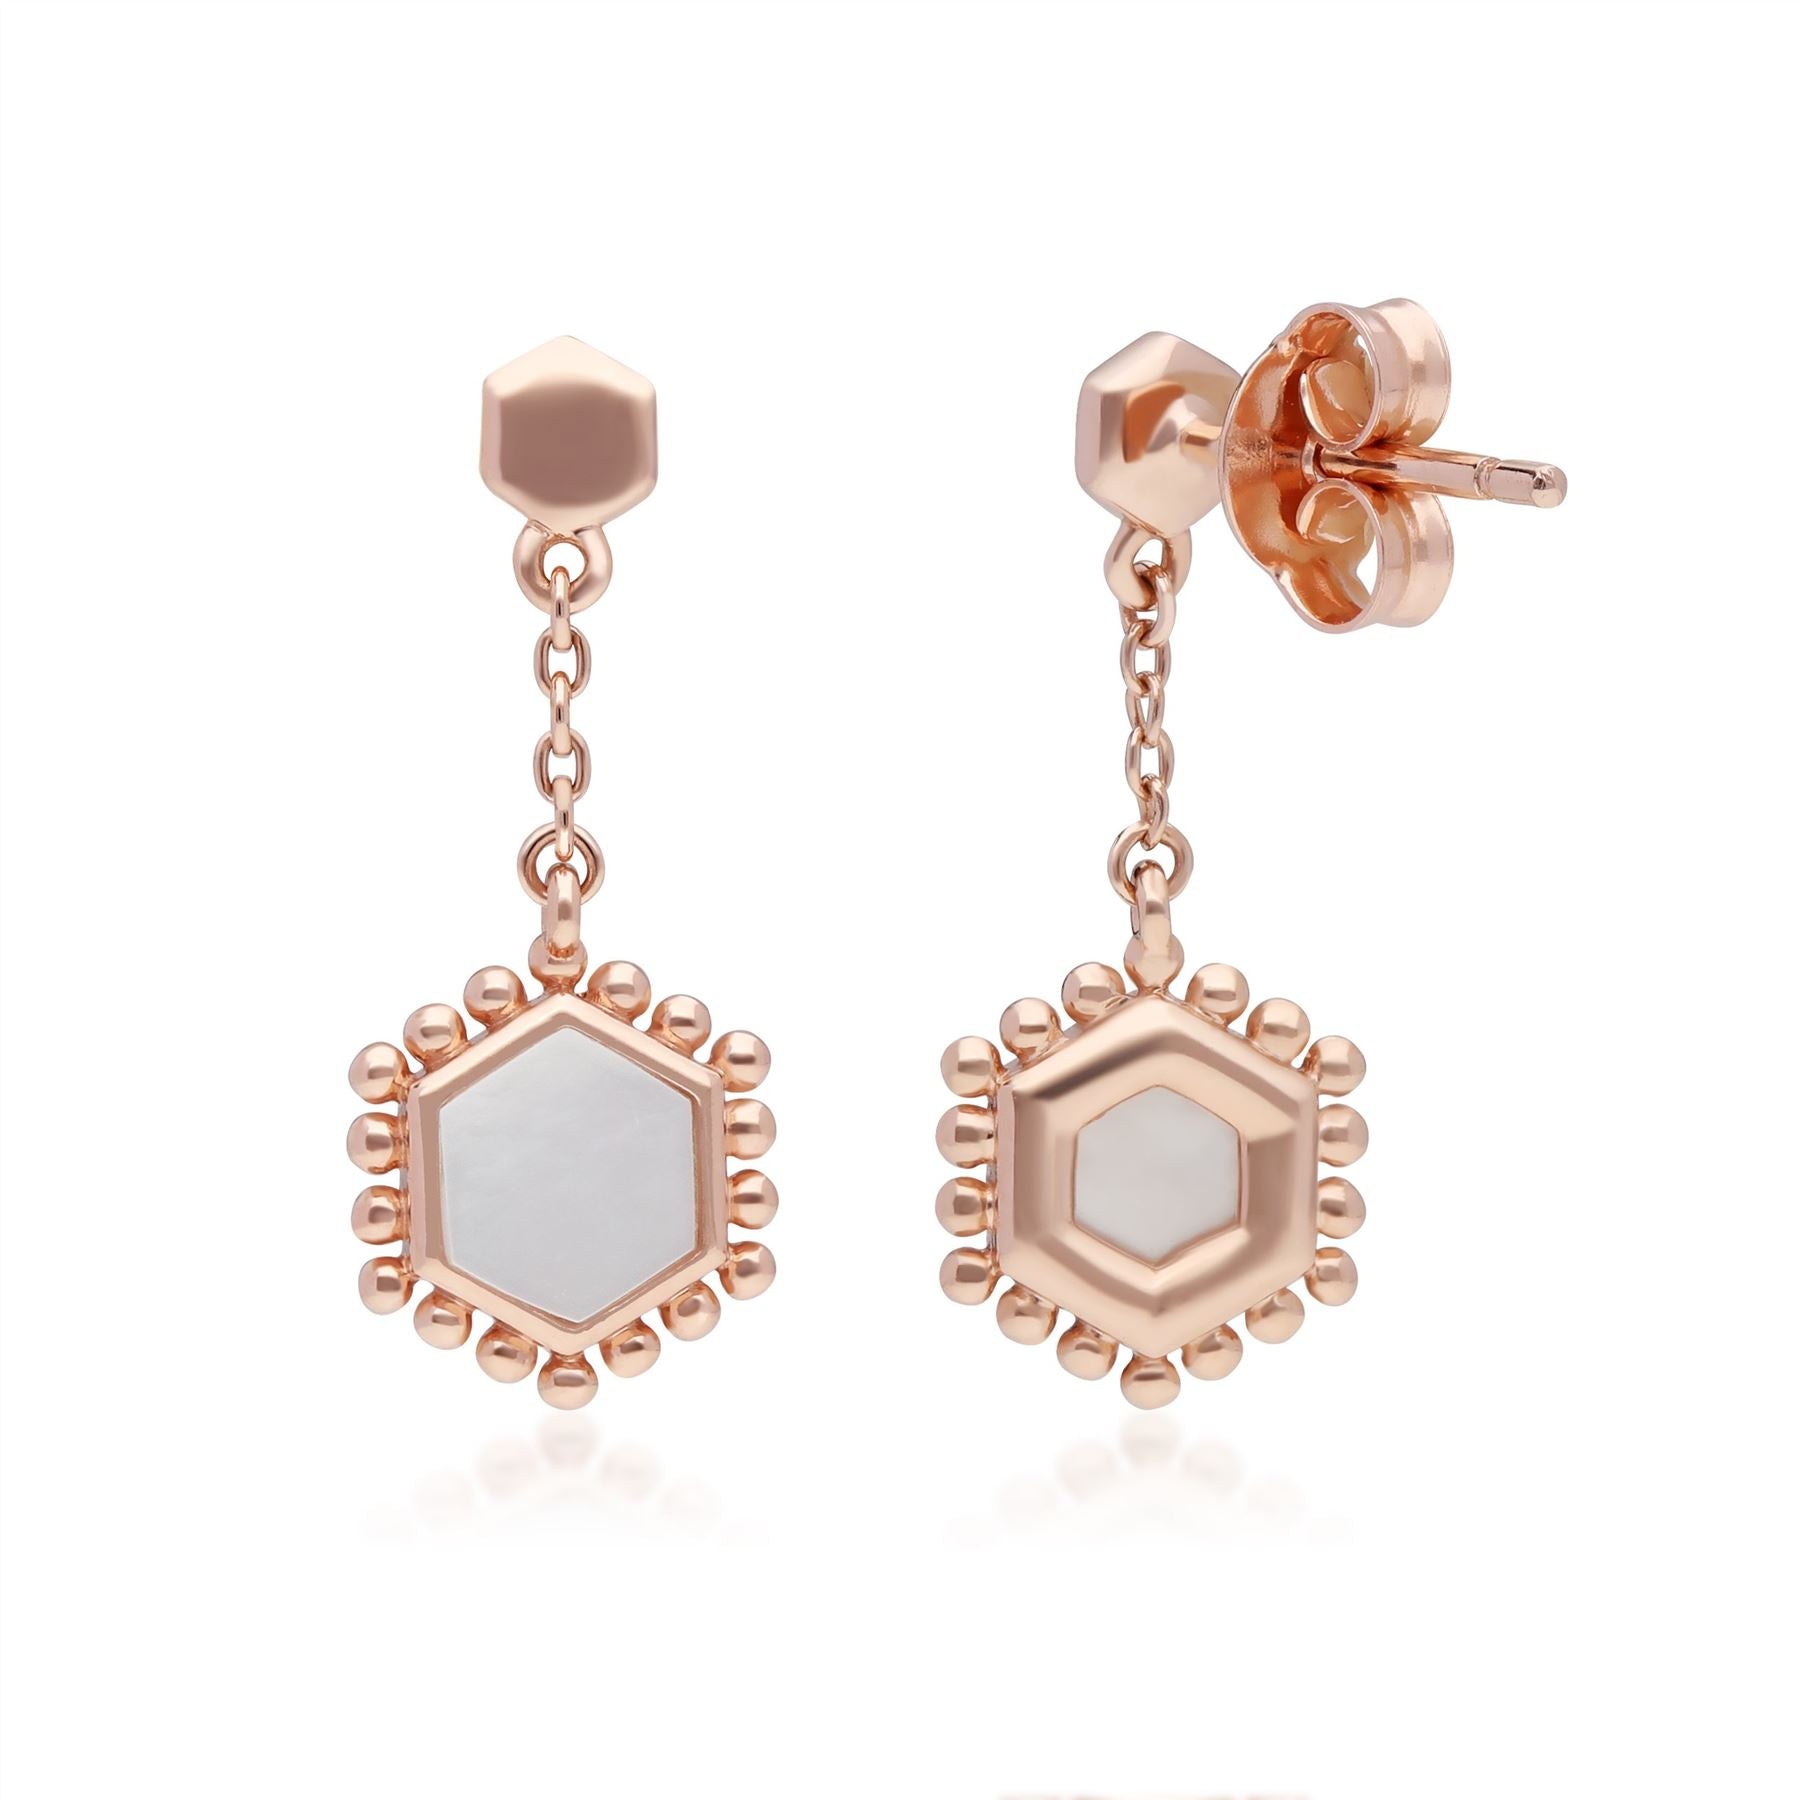 Mother of Pearl Slice Chain Drop Earrings in Rose Gold Plated Sterling Silver